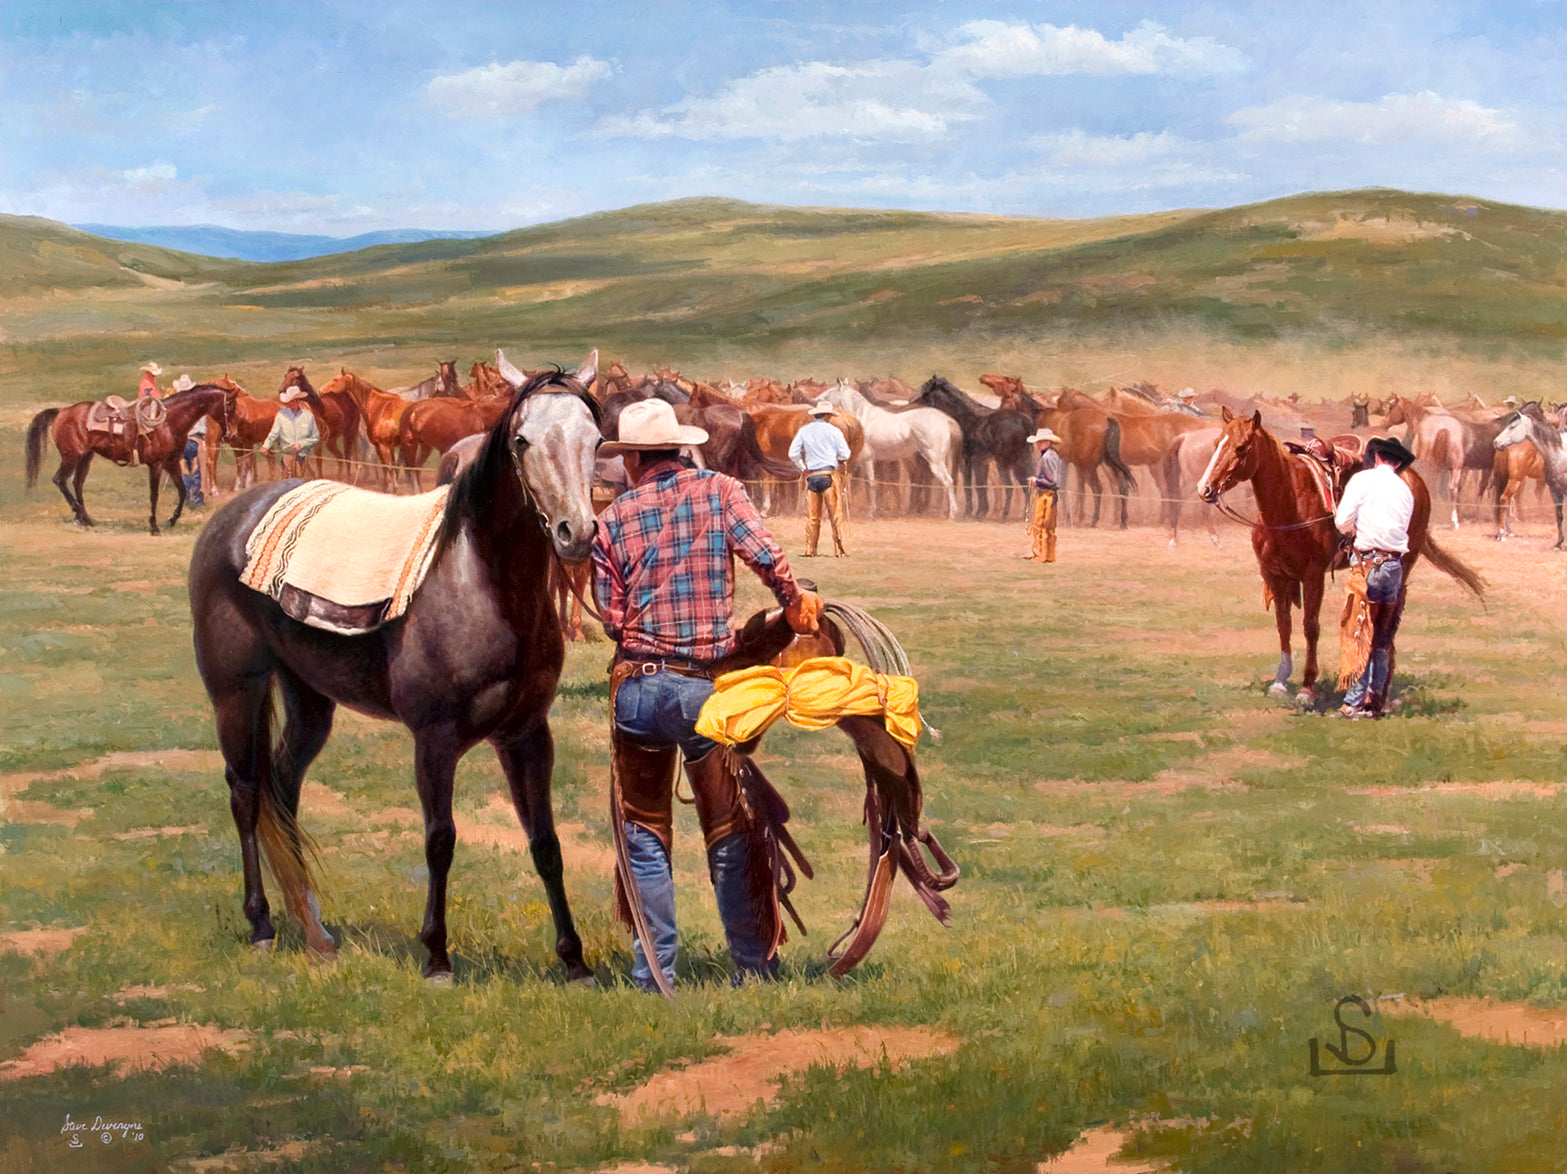 A Good Day for the Gray by Steve Devenyns is a 36" x 48" Original Oil Painting featuring a cowboy changing horses at noon.. His Award winning art has been featured in the Buffalo Bill Art Show, Quest for the West Art Show, National Museum of Wildlife Art, Cheyenne Frontier Days Governor’s Art Show, Old West Museum, and America’s Horse.